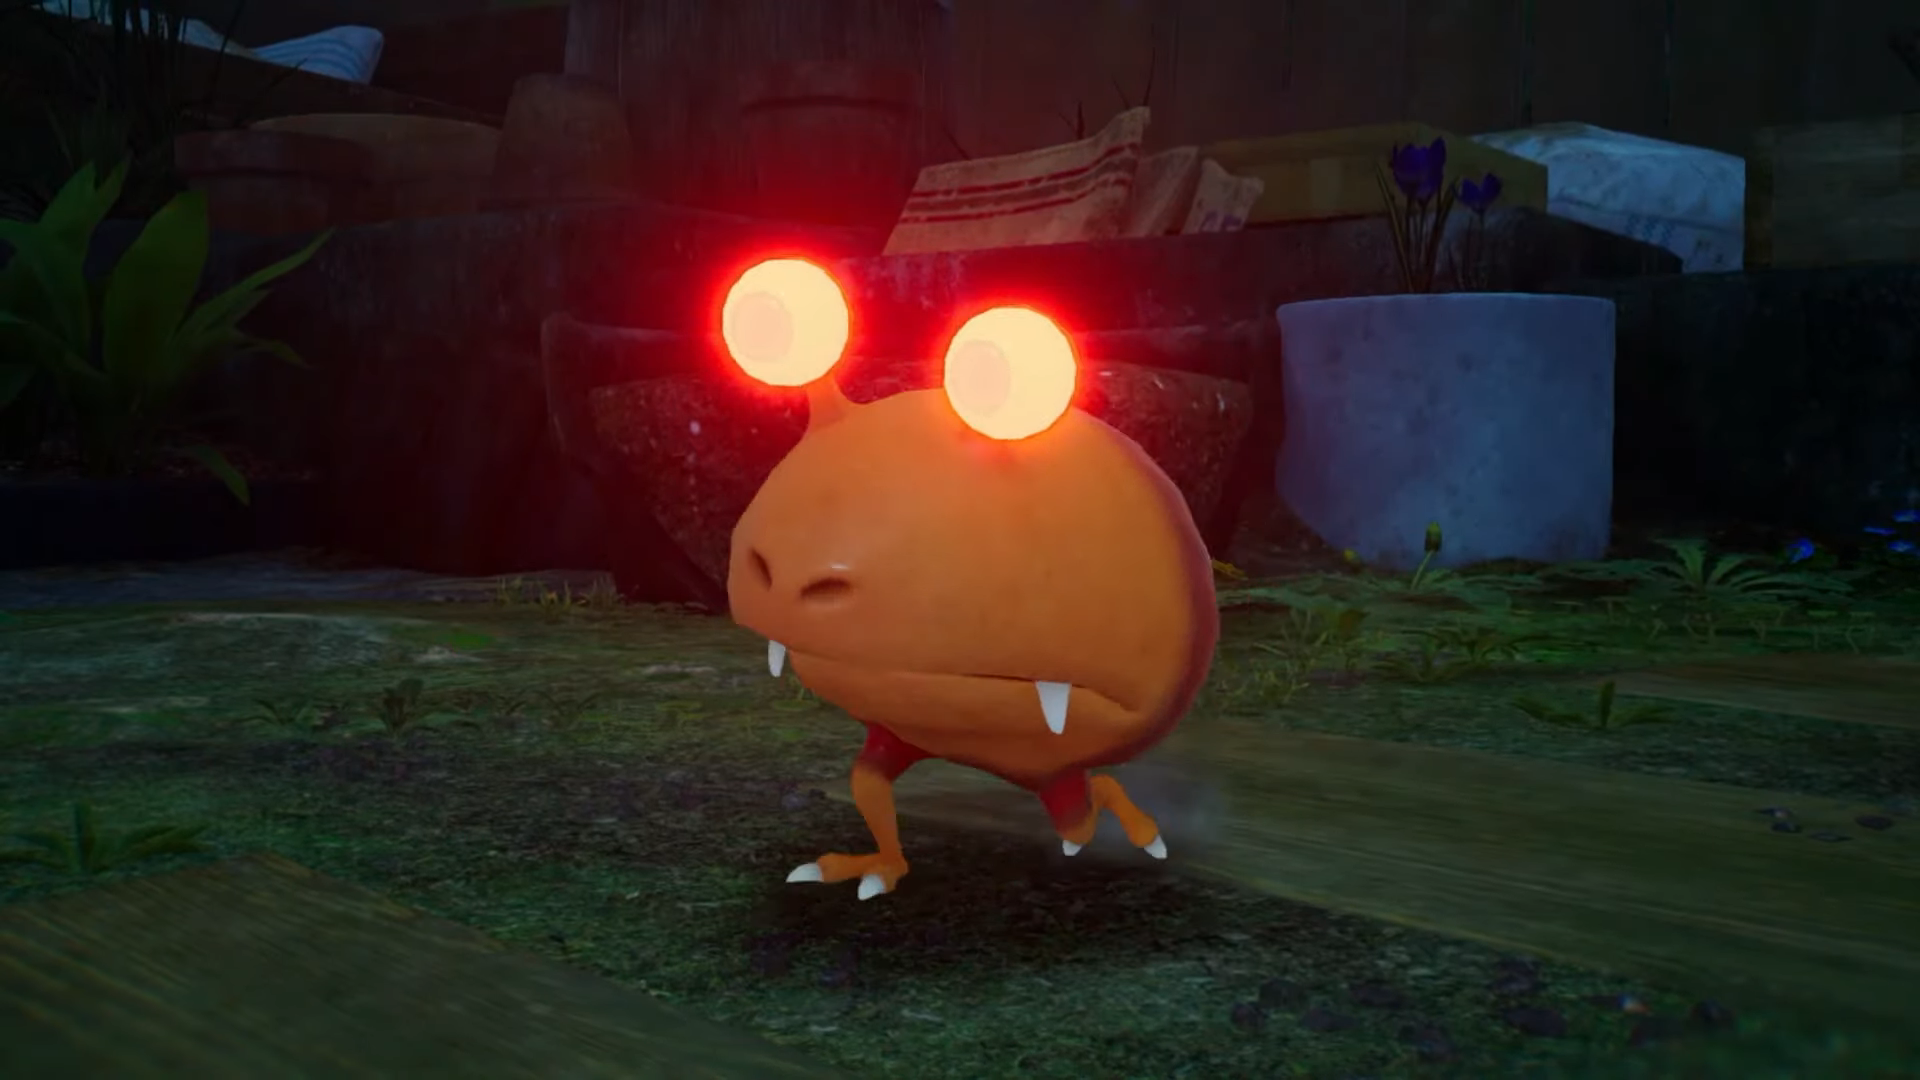 A glowing-eyed enemy with a big mouth walks through a grassy area.